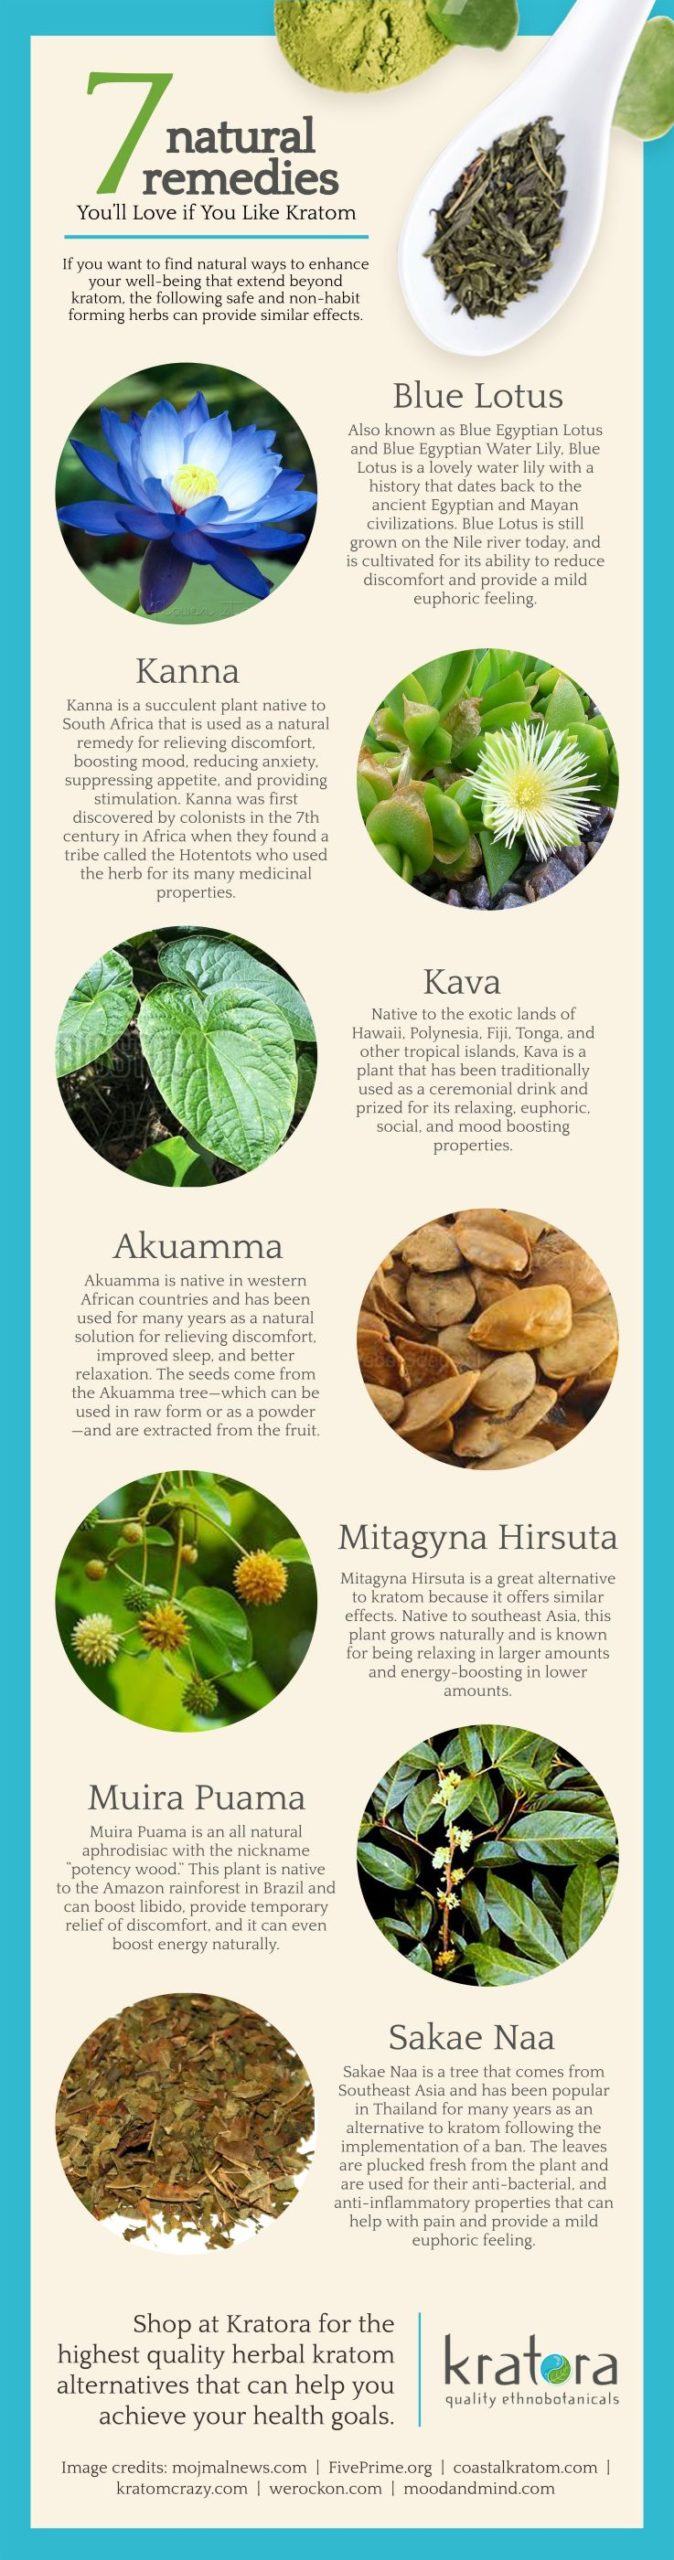 Infographic highlighting the best natural remedies for kratom lovers, including Blue Lotus & Kanna. 